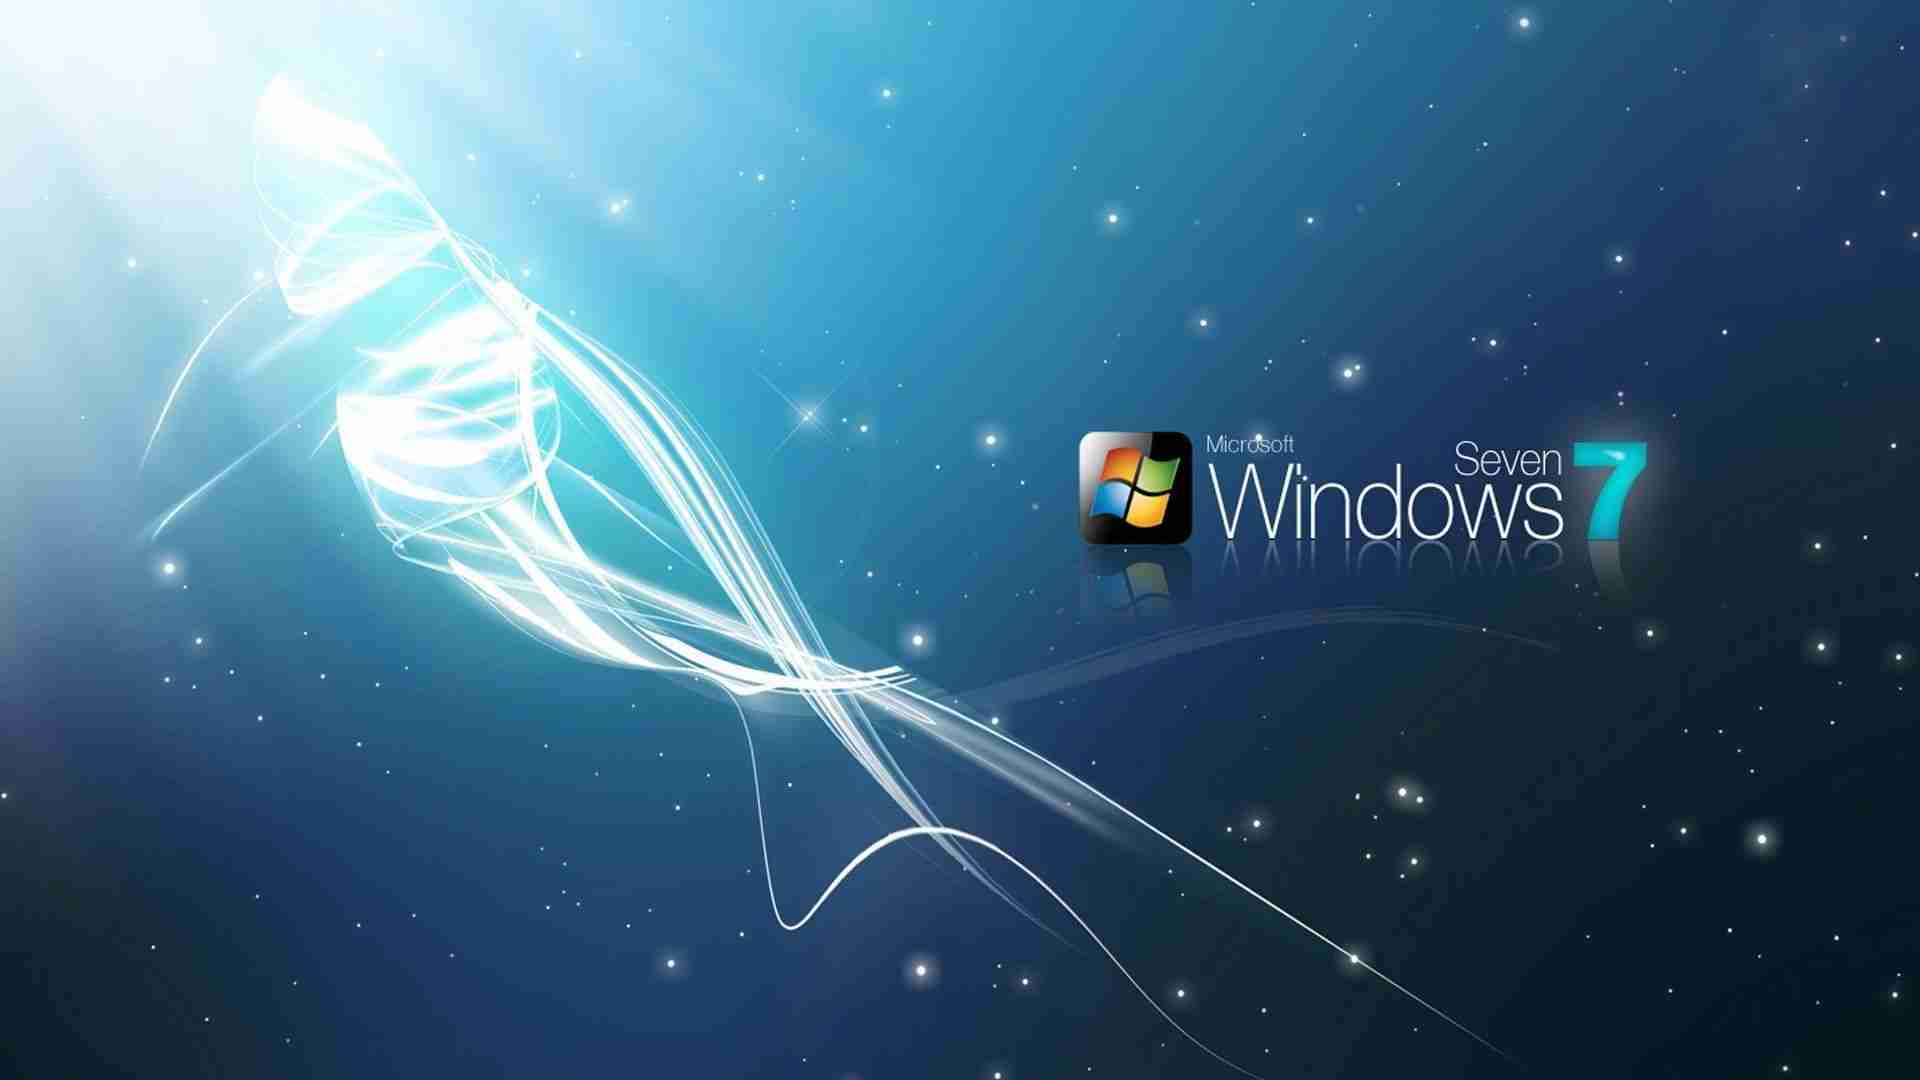 High Definition Windows Wallpaper Background For